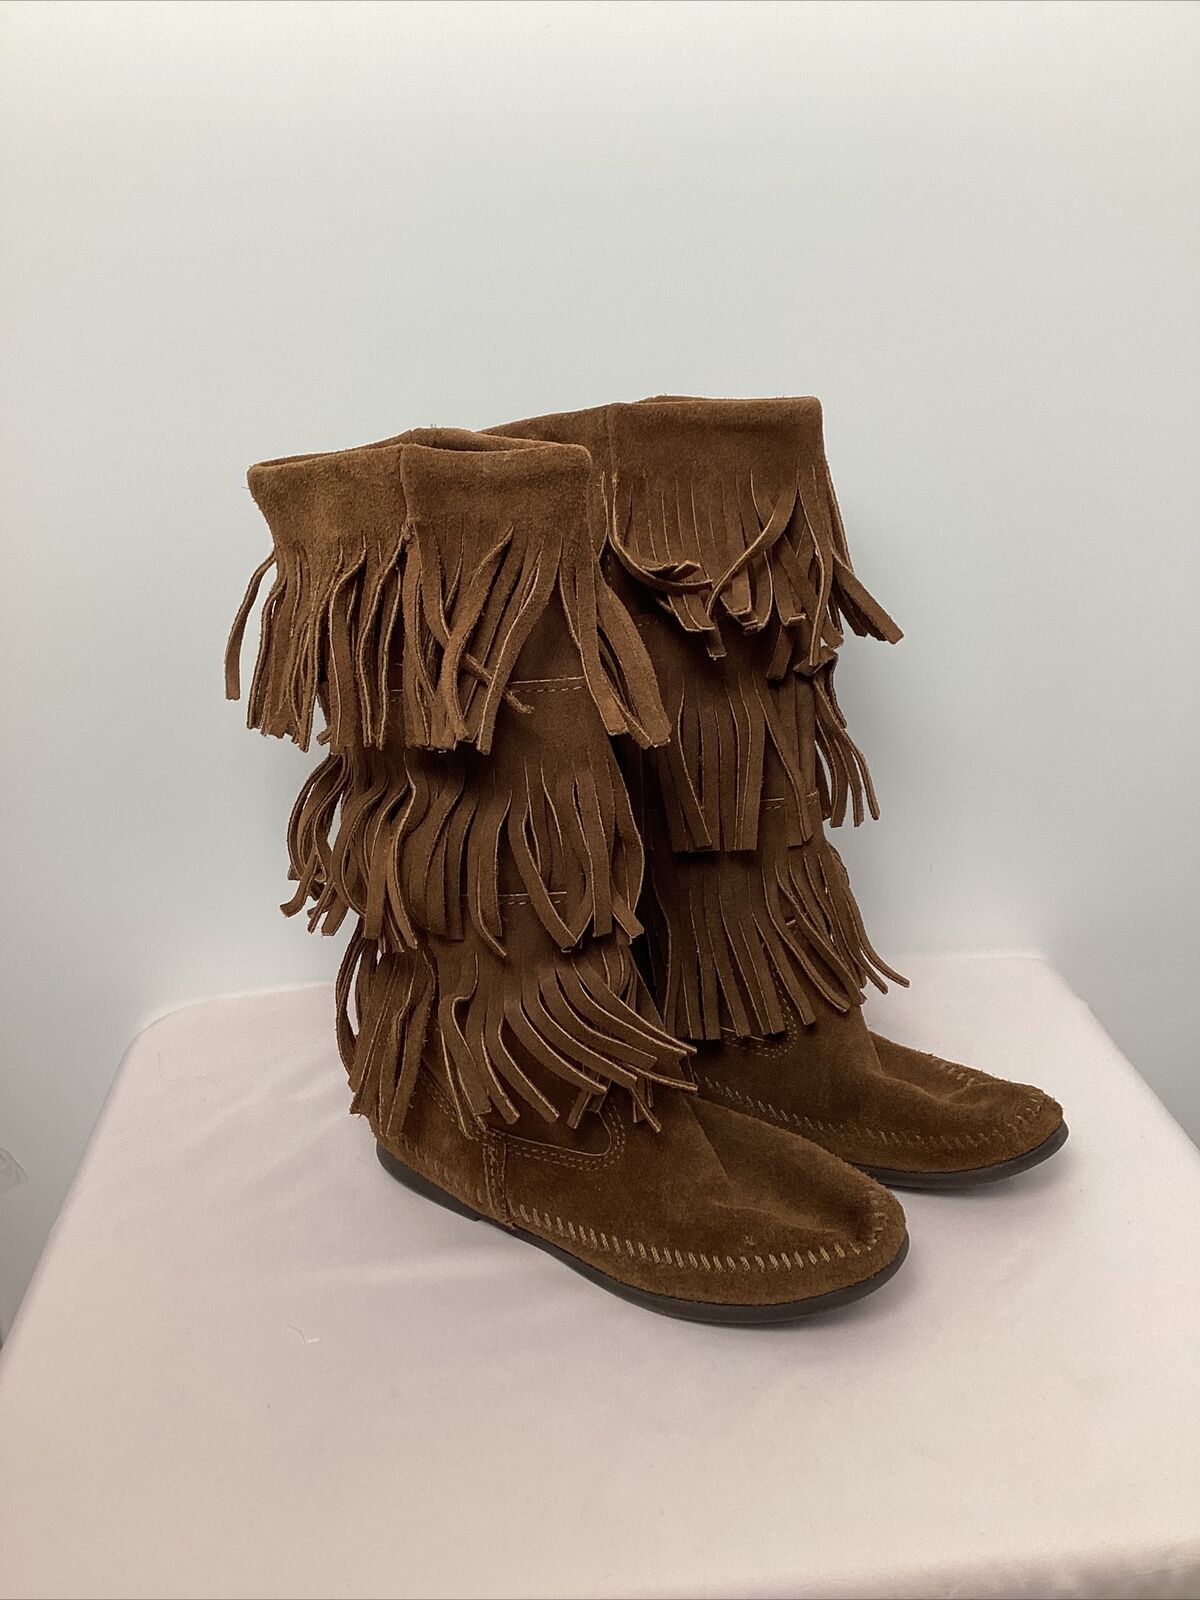 Minnetonka Moccasins Women 3 Layer Fringe Brown Suede Leather Boots 1638 Sz 6